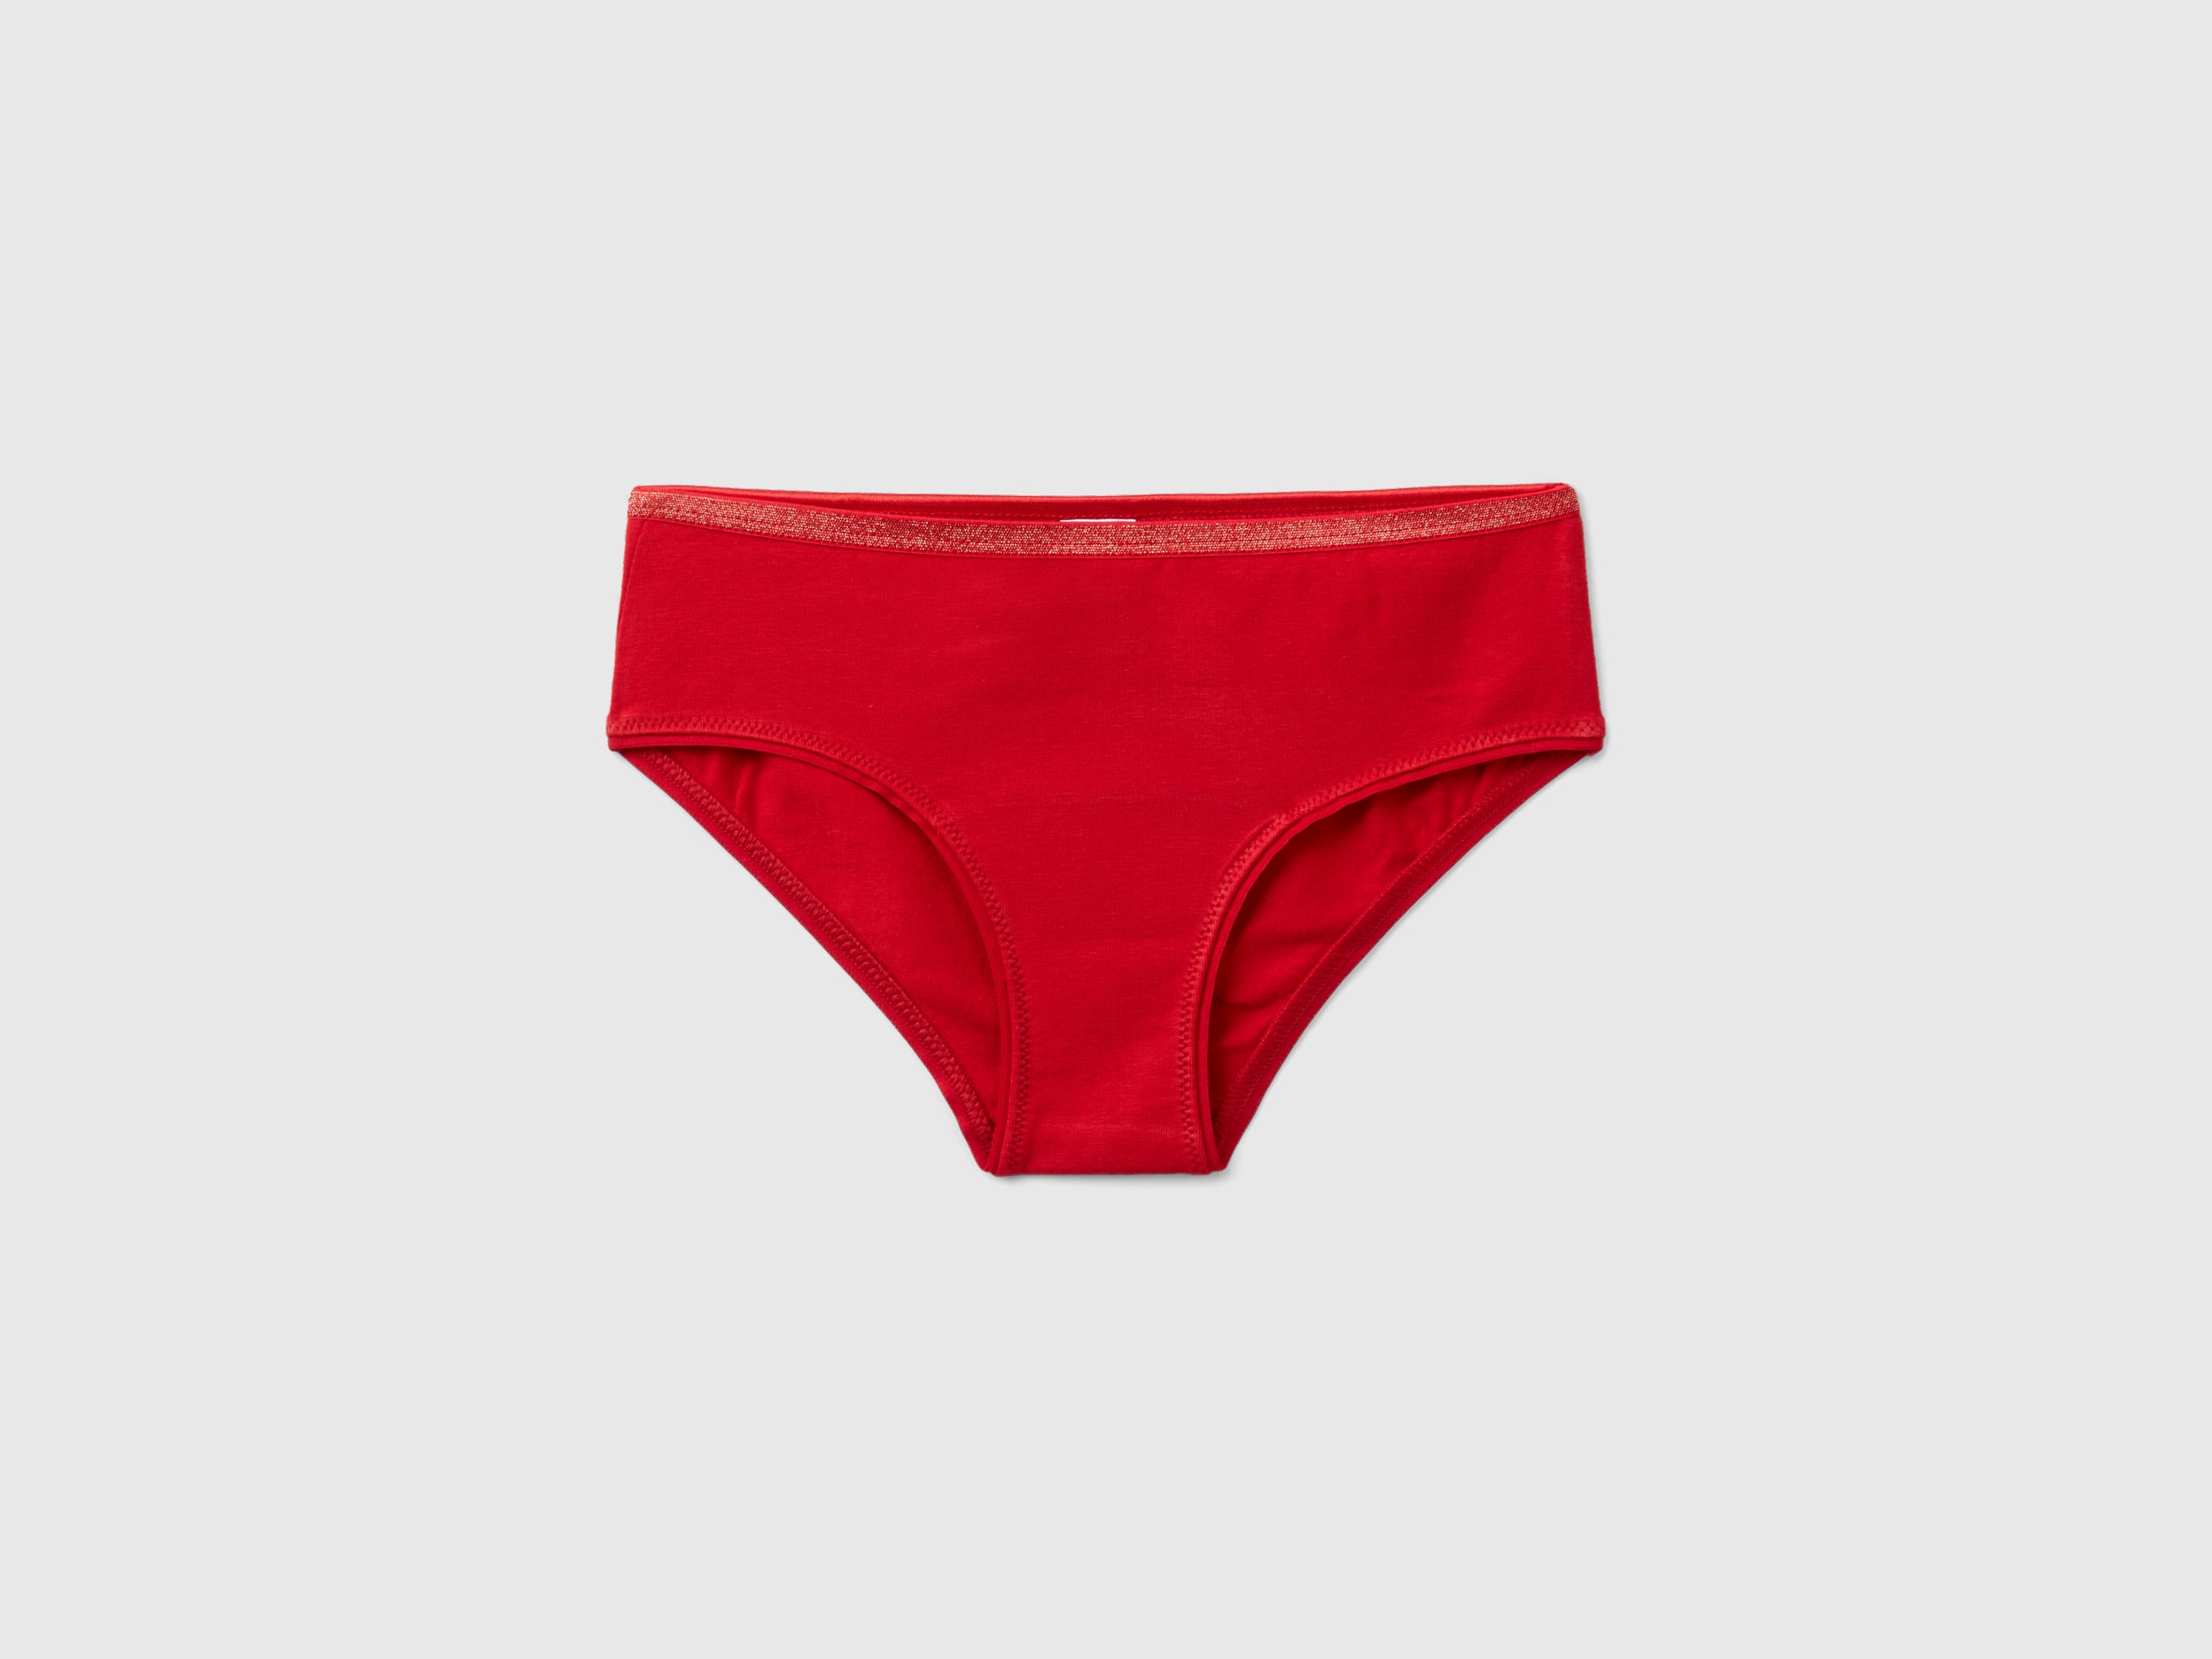 Benetton, Underwear With Minnie Mouse Print, size S, Red, Kids